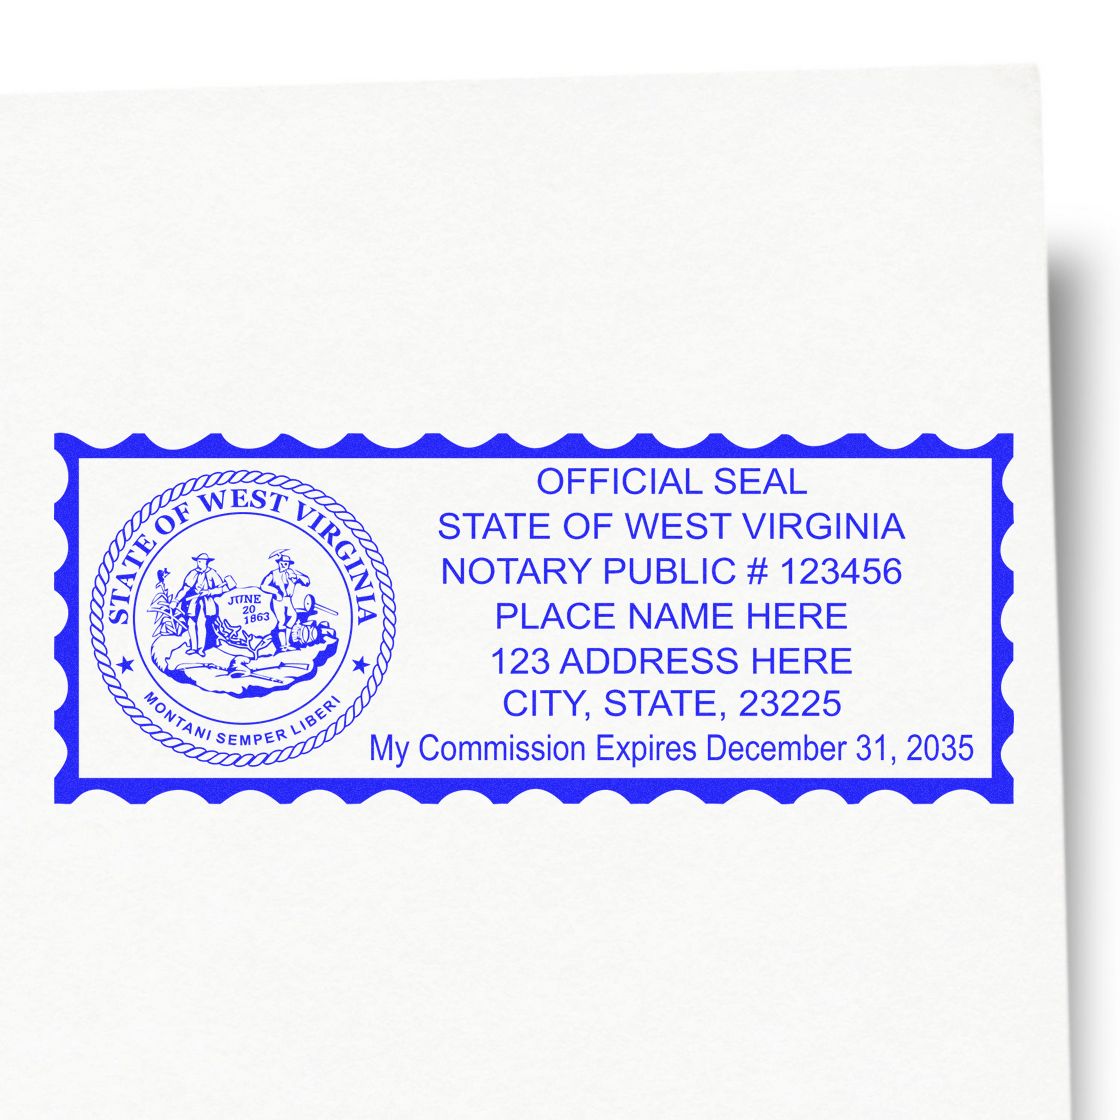 Slim Pre-Inked State Seal Notary Stamp for West Virginia in use photo showing a stamped imprint of the Slim Pre-Inked State Seal Notary Stamp for West Virginia